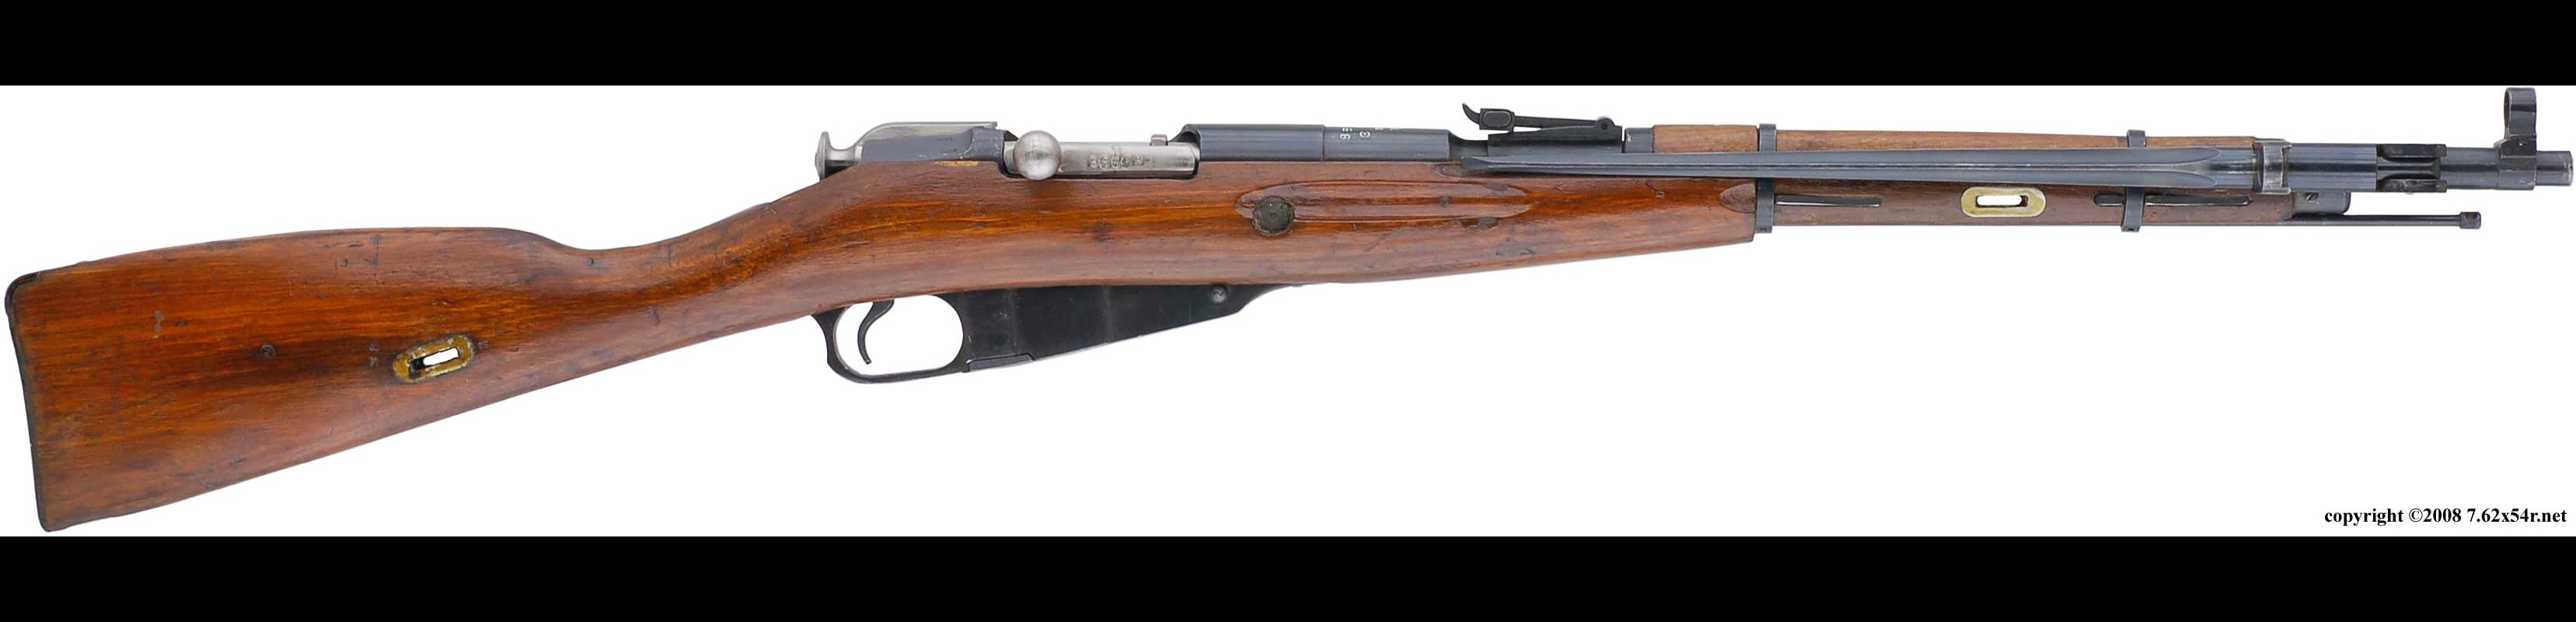 Mosin Nagant M91 30 Rifle Hd Wallpapers Background Images